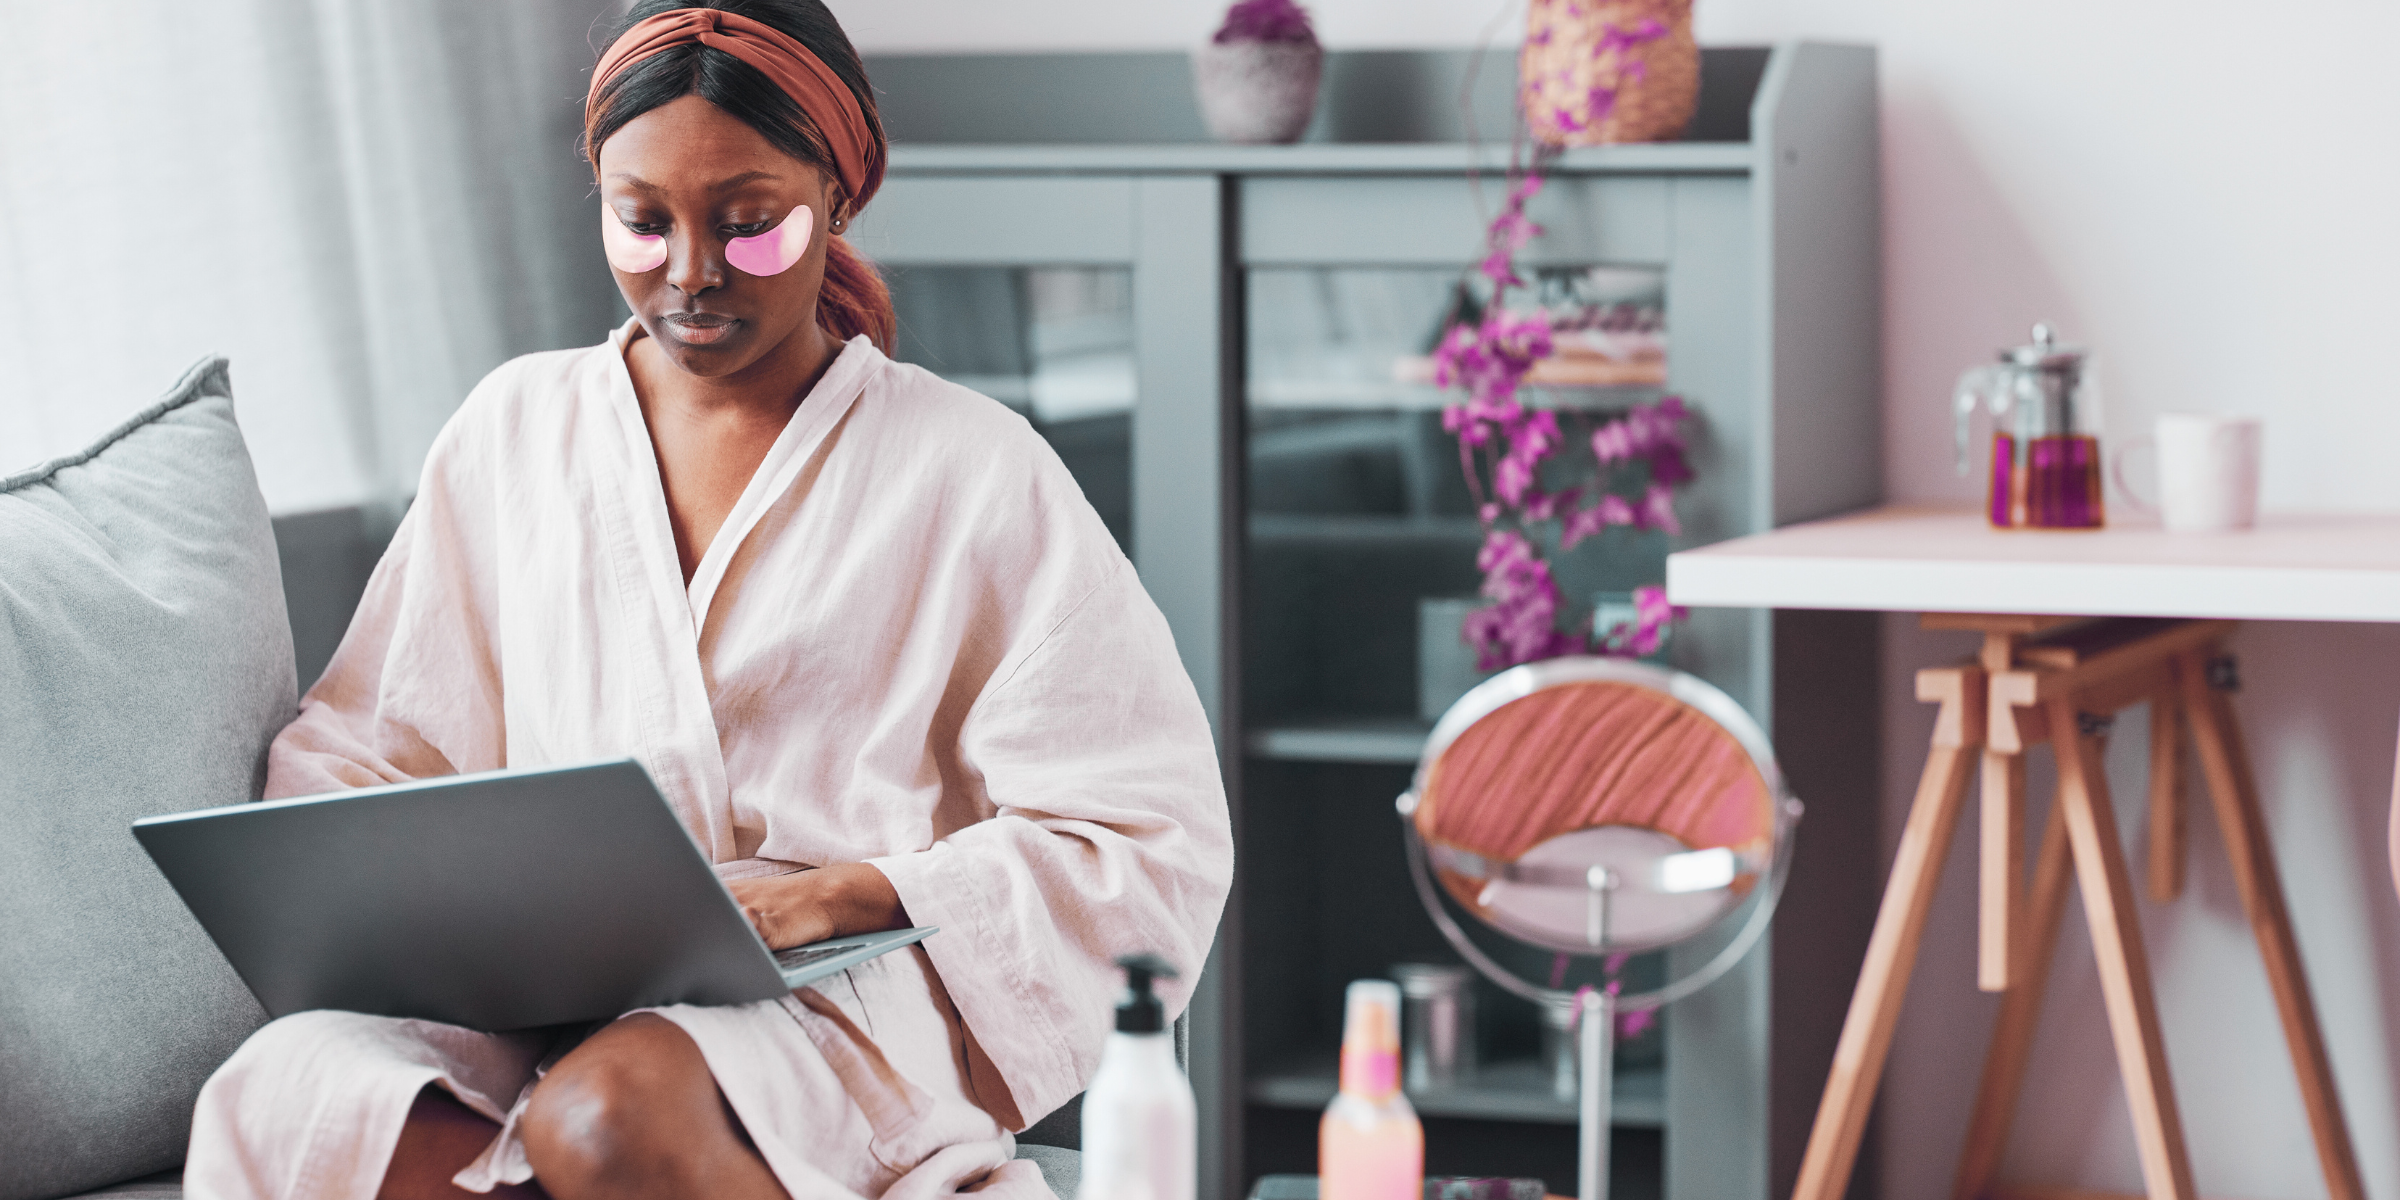 young black woman in spa robe typing on laptop doing self-care for healthier lifestyle